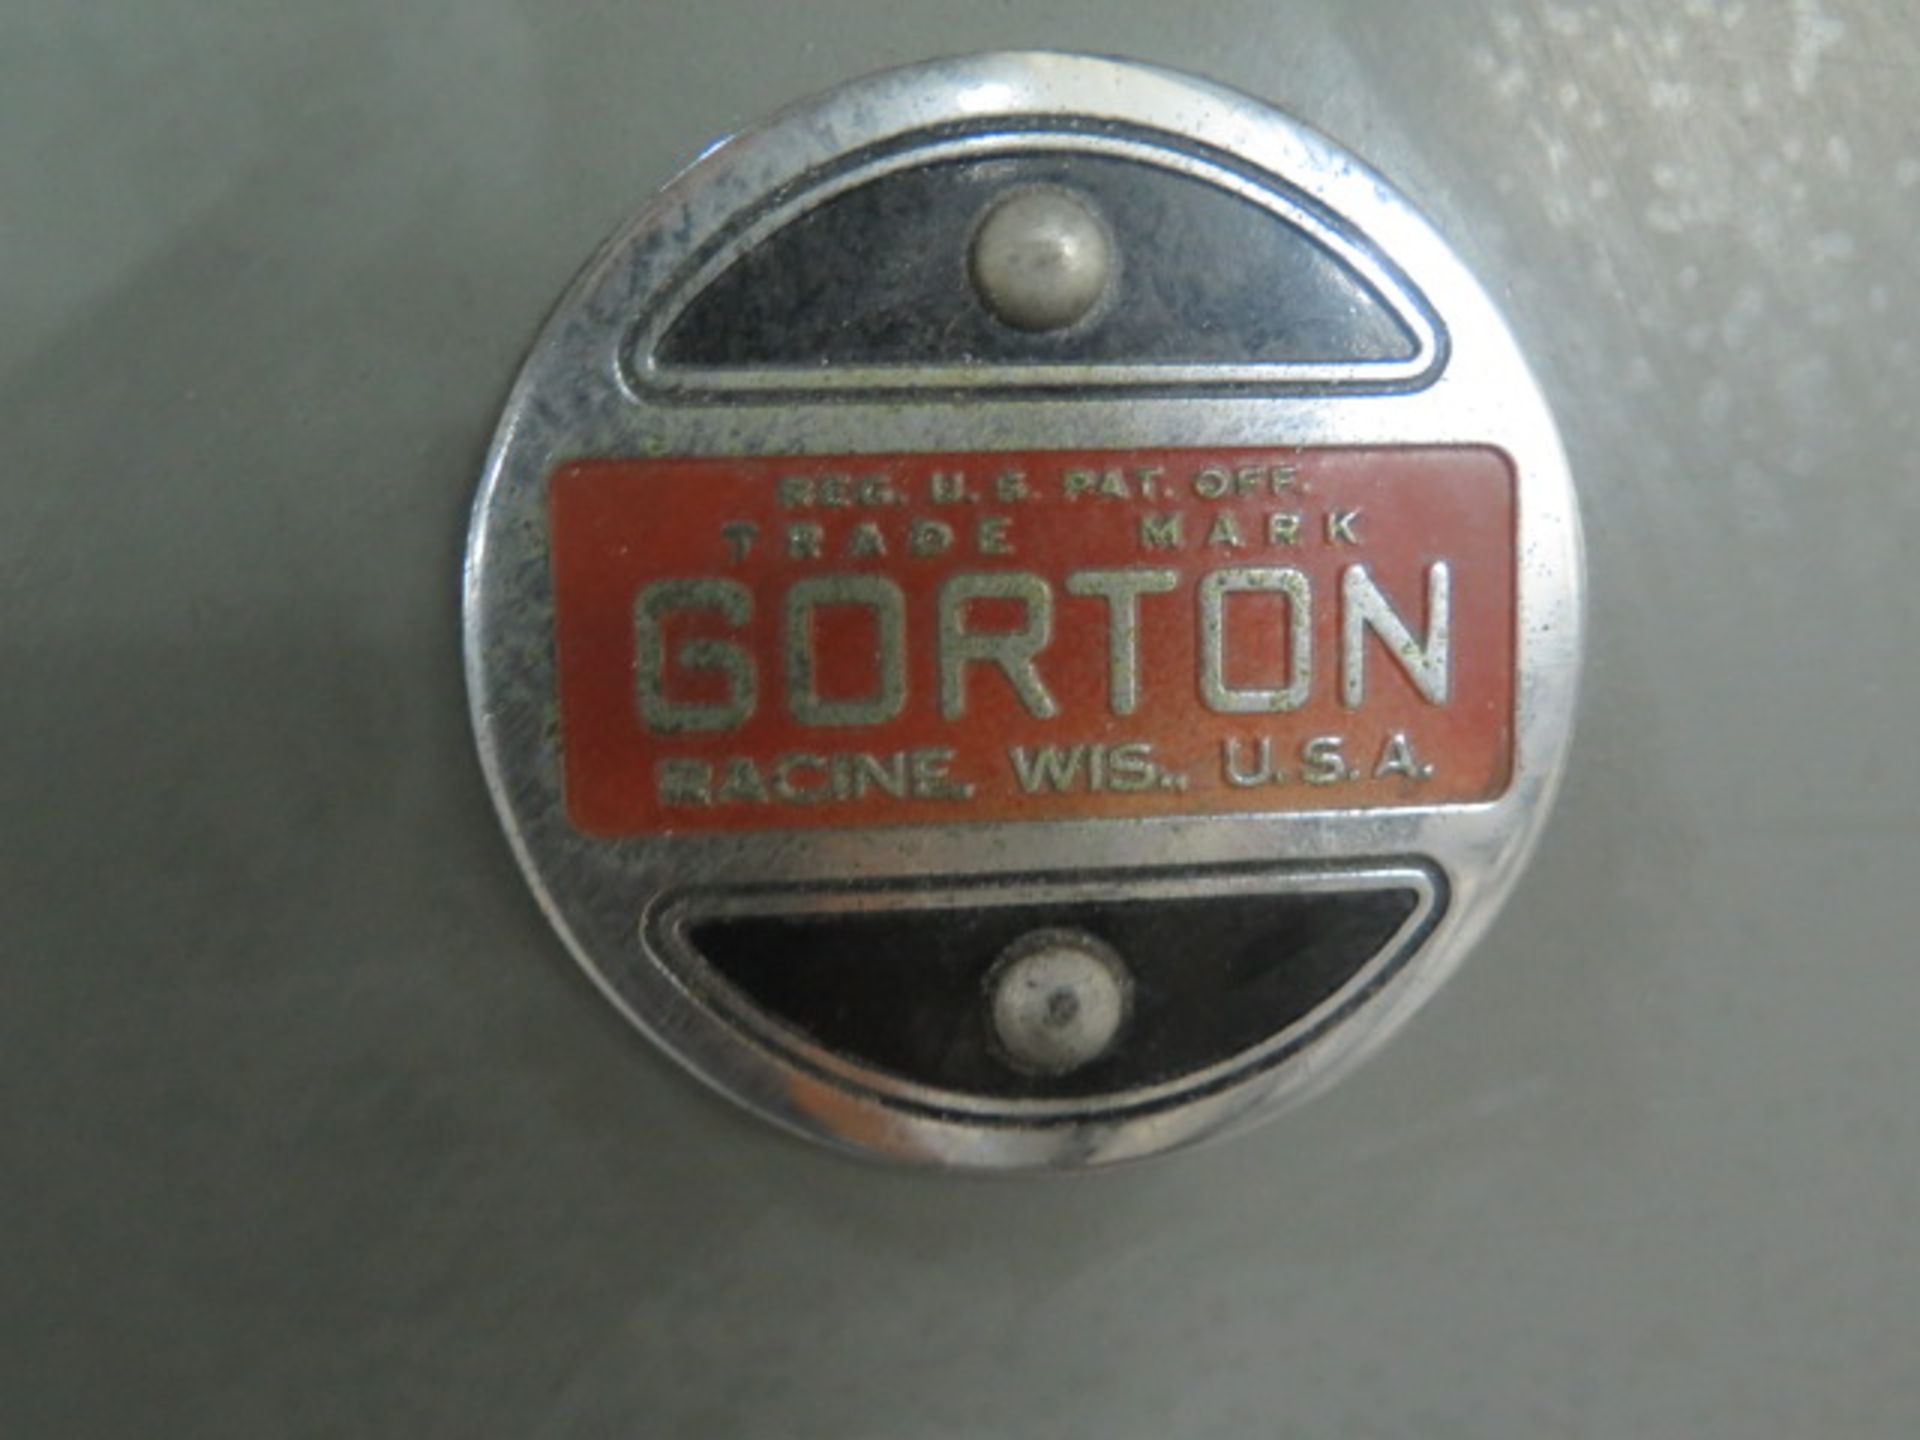 Gorton No. 8 ½ D Vertical Mill s/n 35931 w/ 2Hp Motor, 6-Speeds, Power Feeds, 9 ¼” x 34” Table - Image 8 of 8